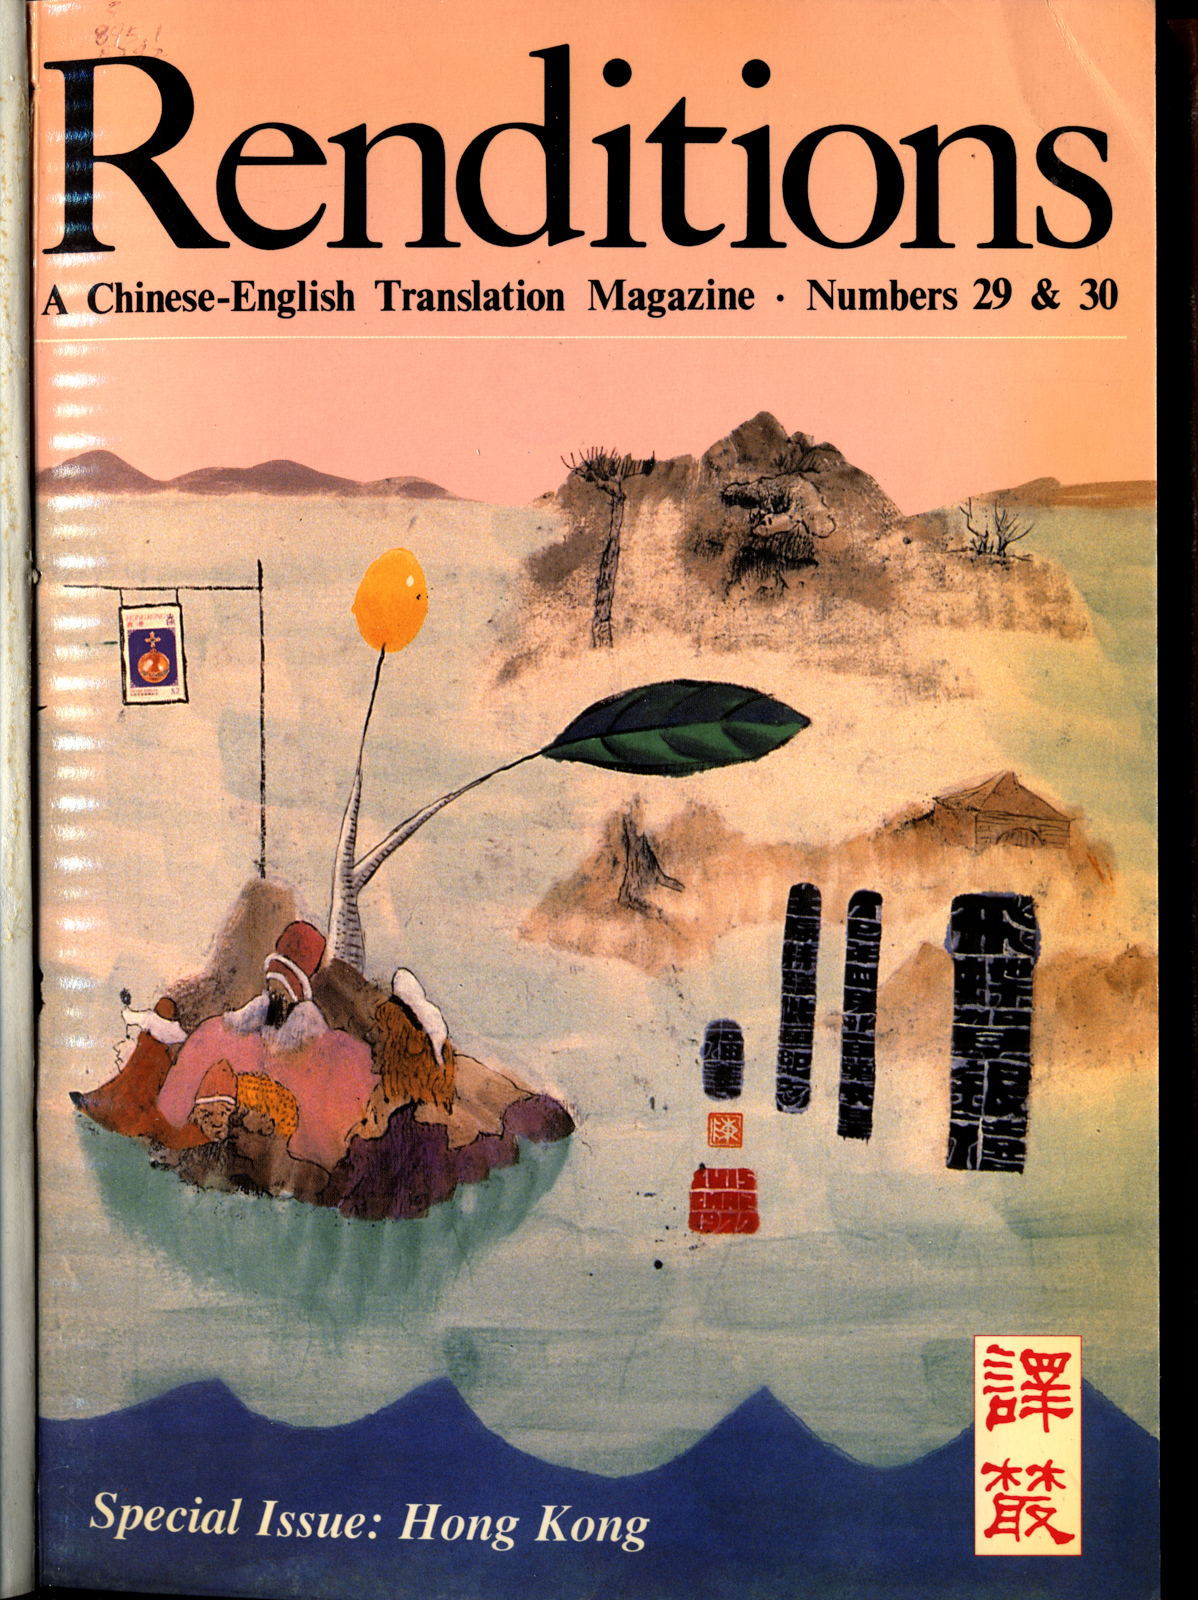 Renditions, nos. 29 & 30 Spring & Autumn 1988, Special Issue on Hong Kong